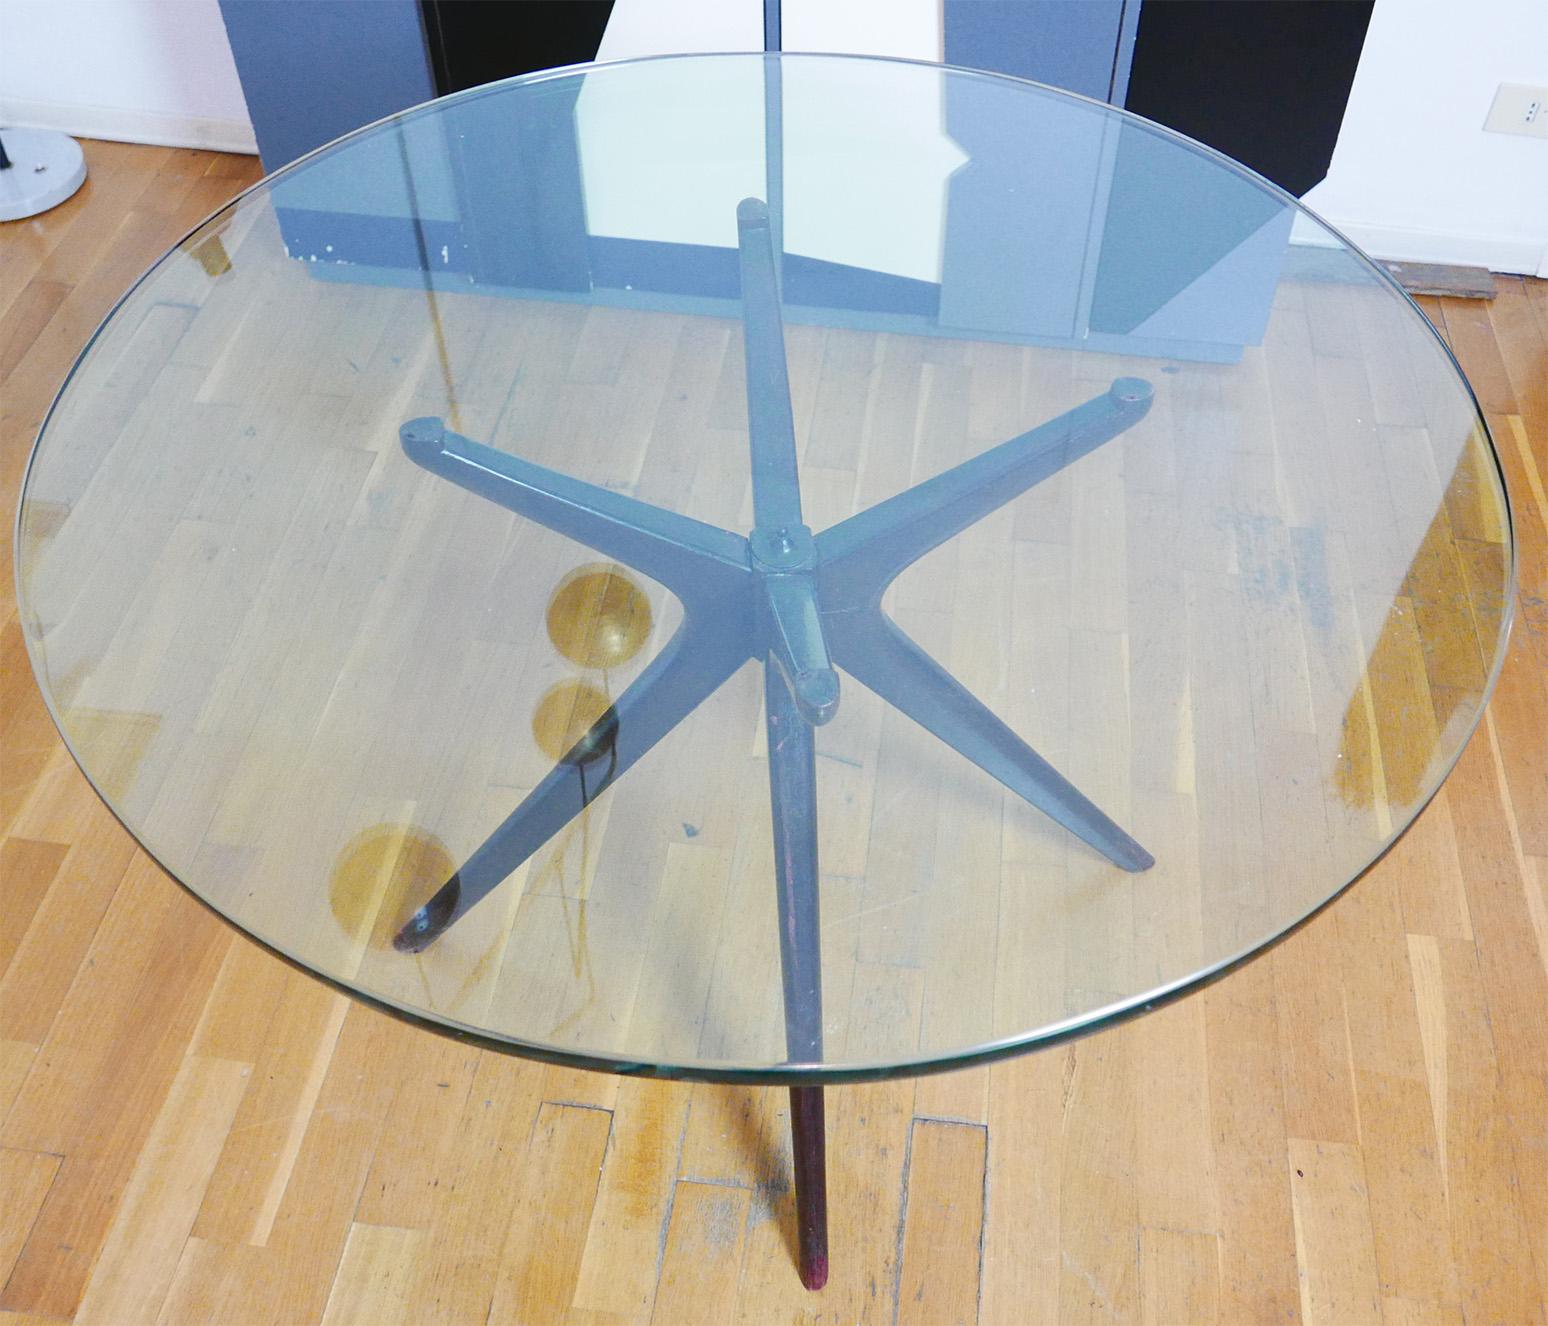 Turned Mid-Century Modern Italian Round Wood Table with Thick Glass Top, Milano, 1950s For Sale